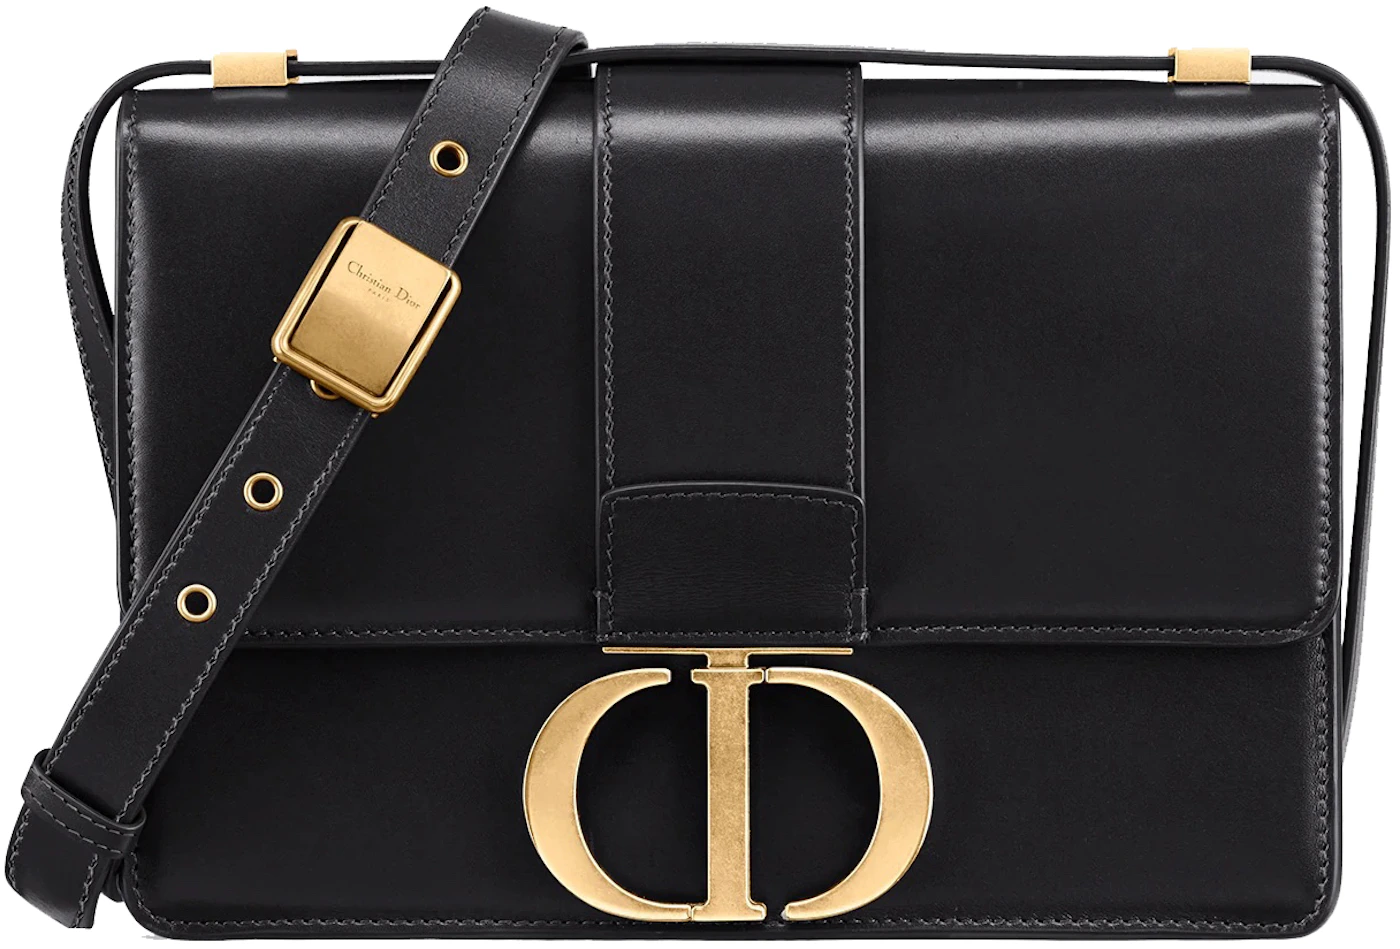 Dior's 30 Montaigne Bag Is A Throwback To The Brand's Historical Roots